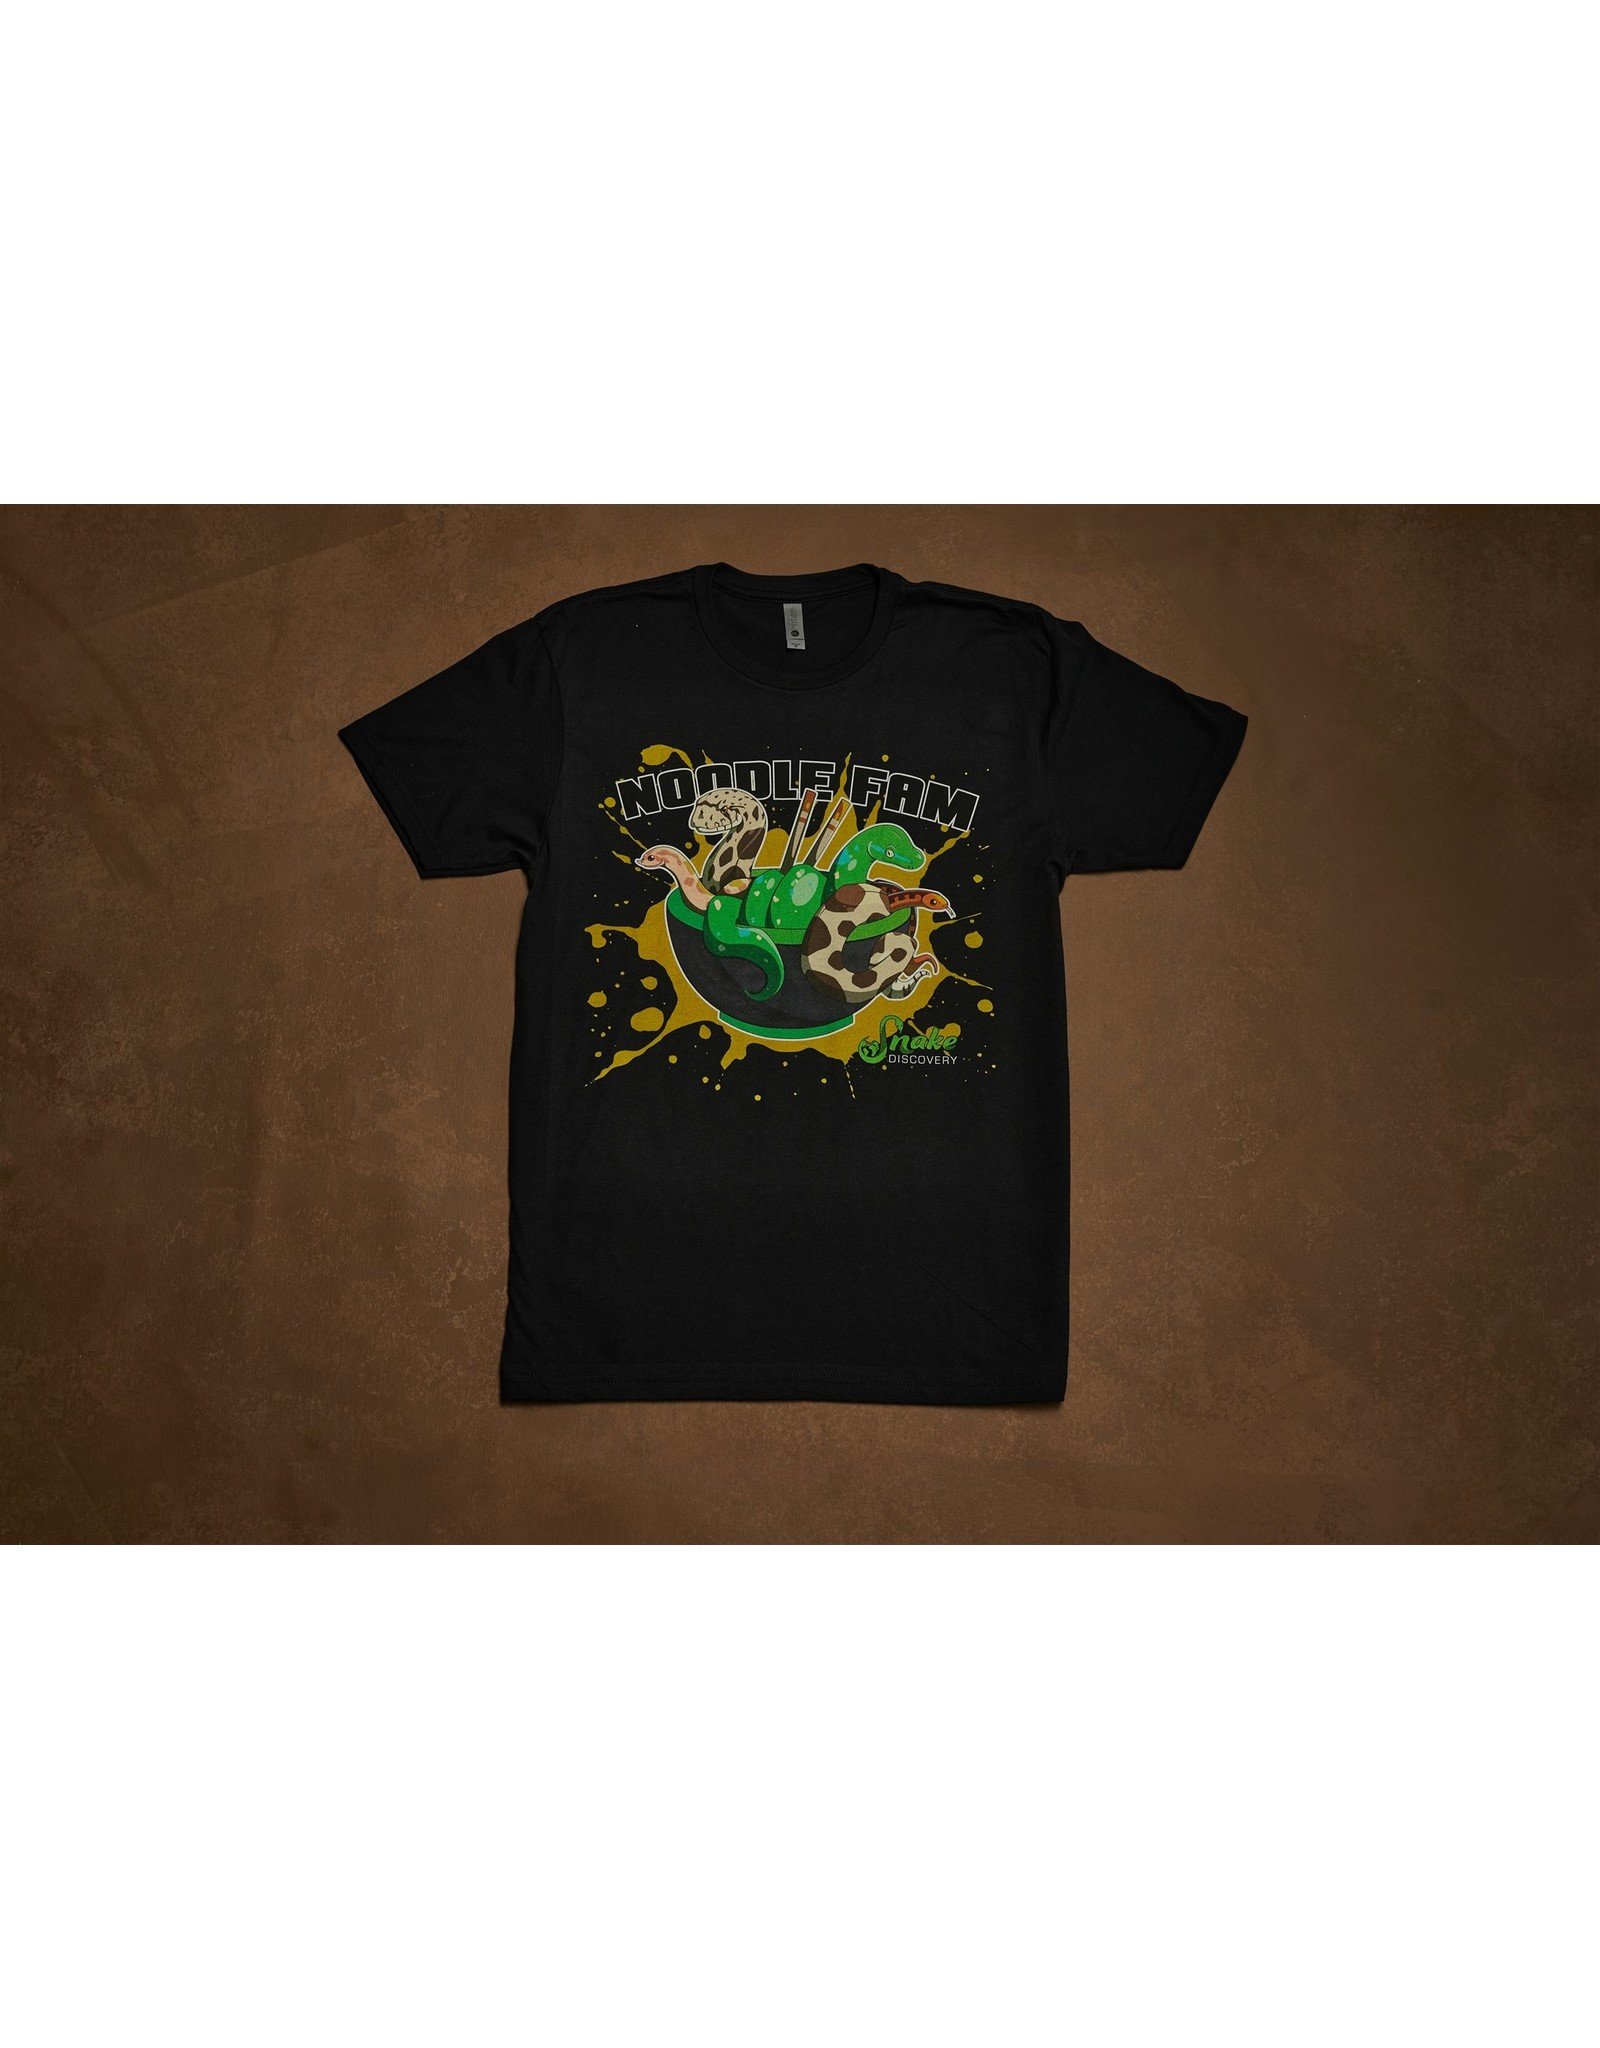 Snake Discovery Noodle Fam Shirt